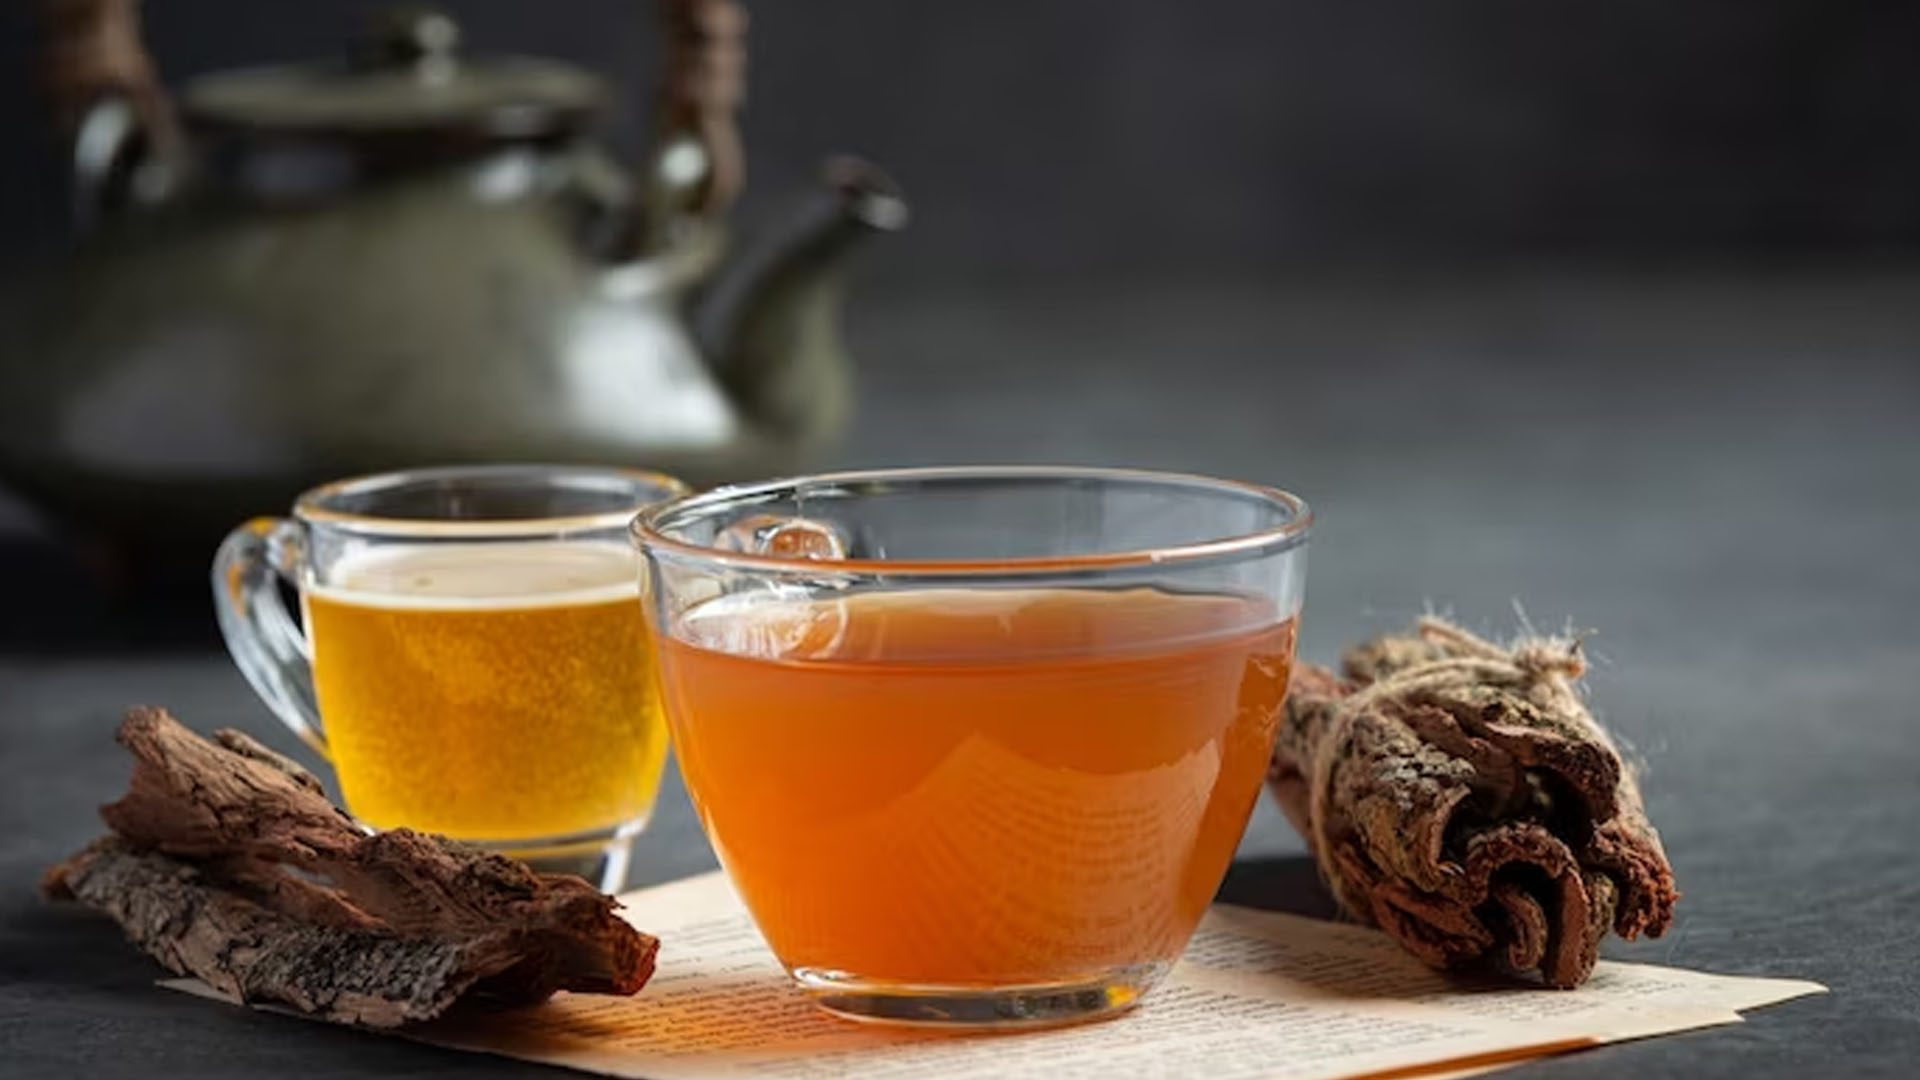 What Are The Different Ingredients Used For Health Benefits In Herbal Tea?